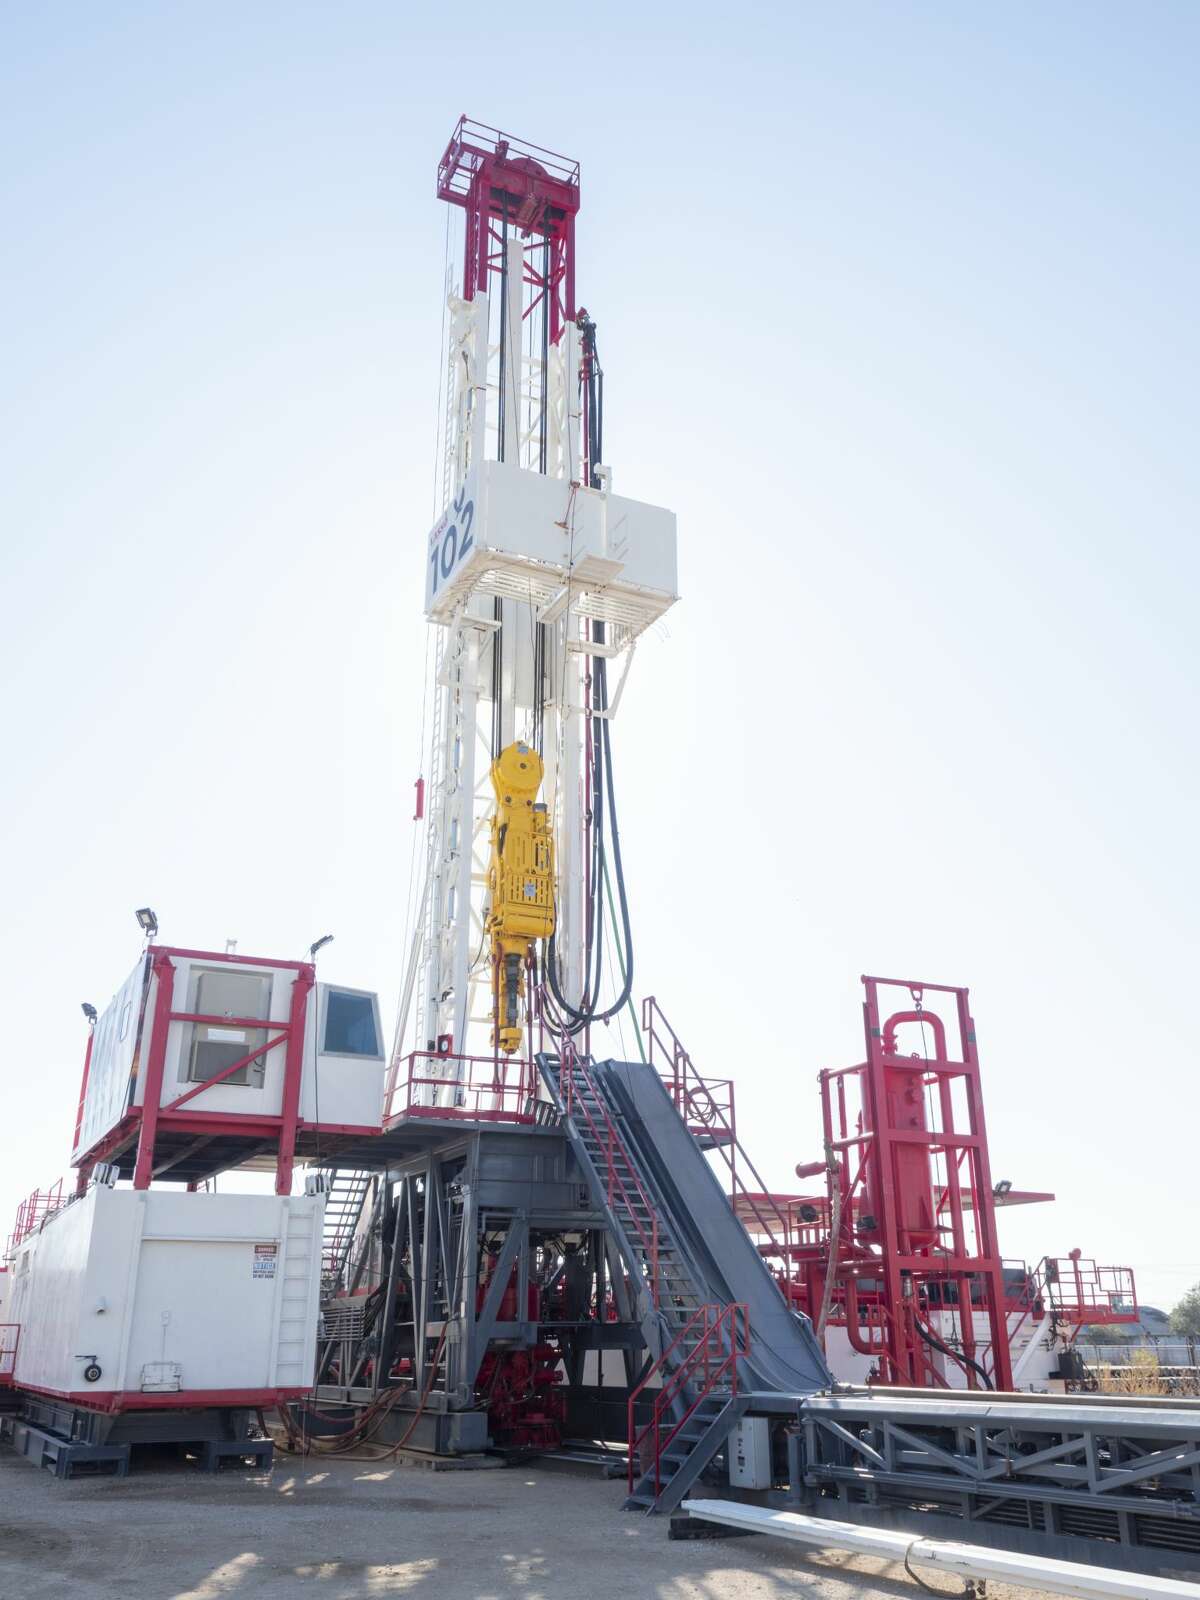 New, ulra-portable drilling rig by Lasso Drilling. 09/03/19 Tim Fischer/Reporter-Telegram